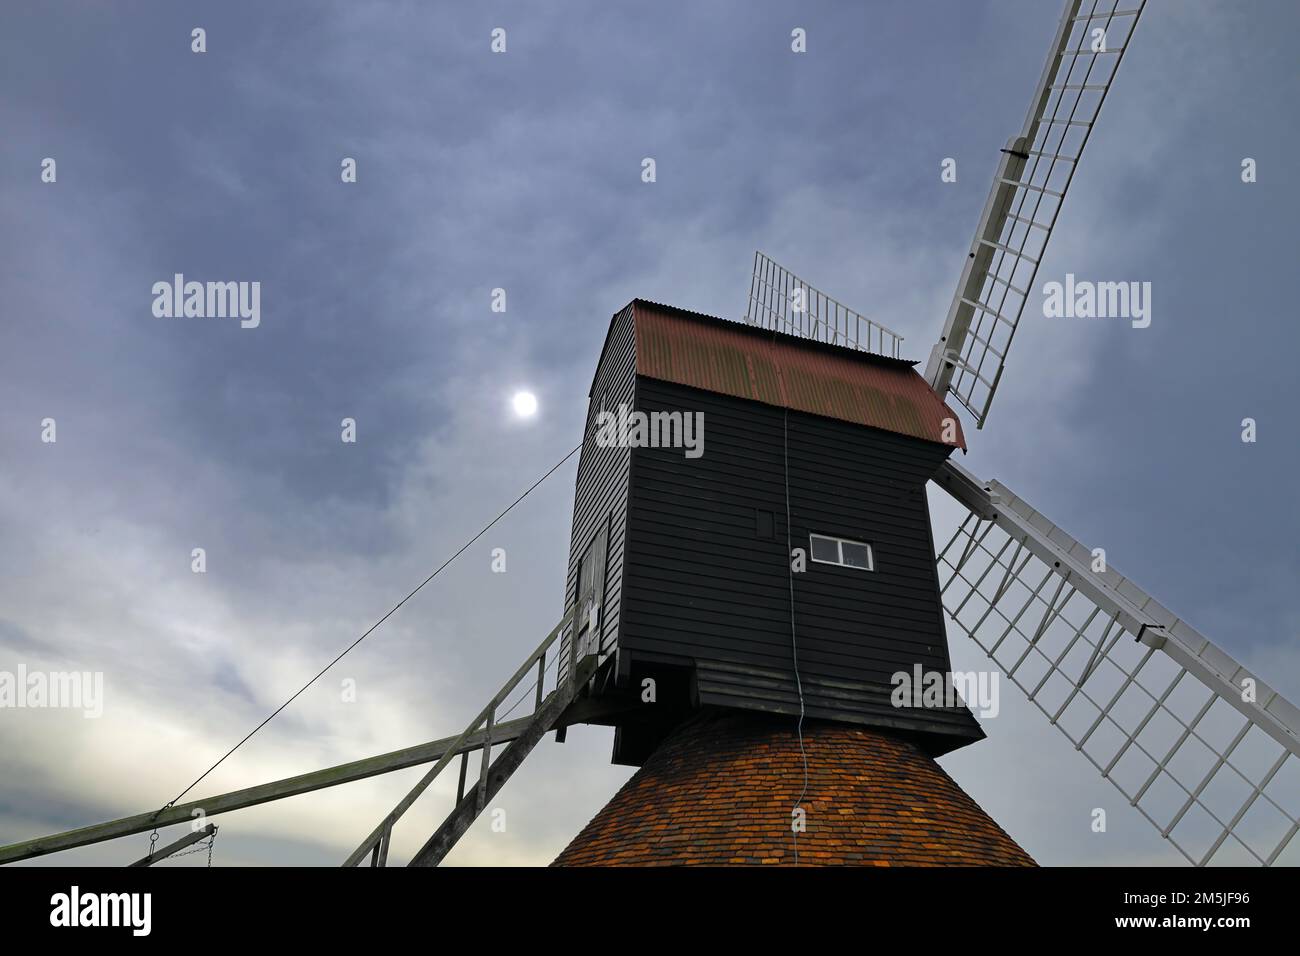 18th century windmill in a field on farmland with sun visible through cloud in the village of Stevington, Bedfordshire, England, UK Stock Photo